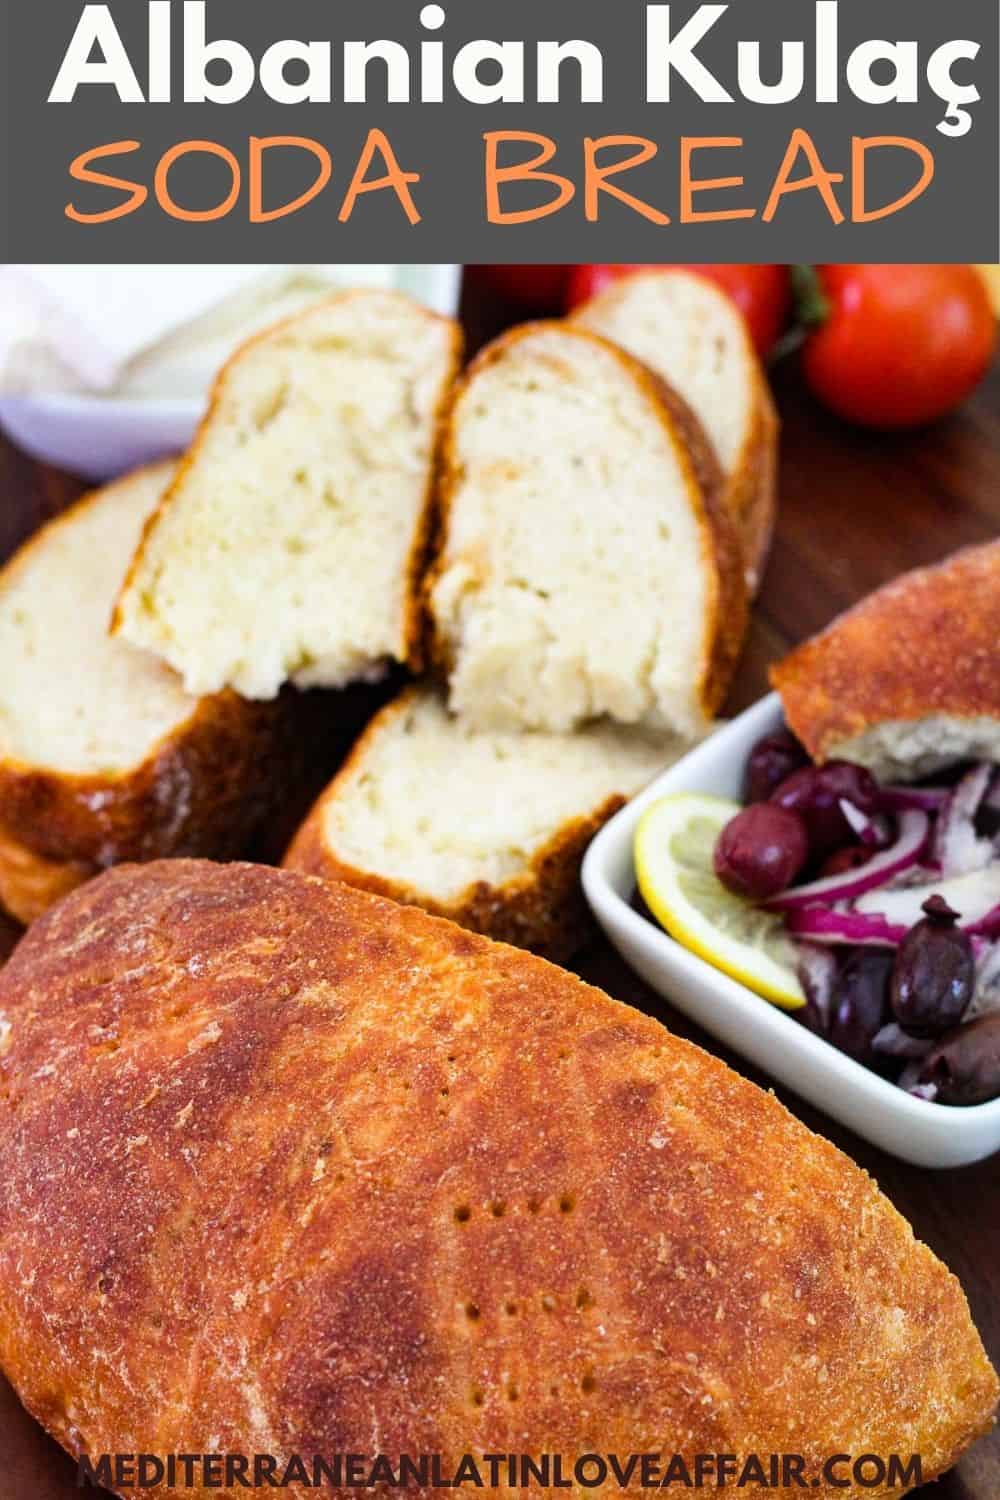 Homemade soda bread (Kulaç) shown cut in half, half is sliced and half is whole. Bread is next to mezes like olives and cheese.